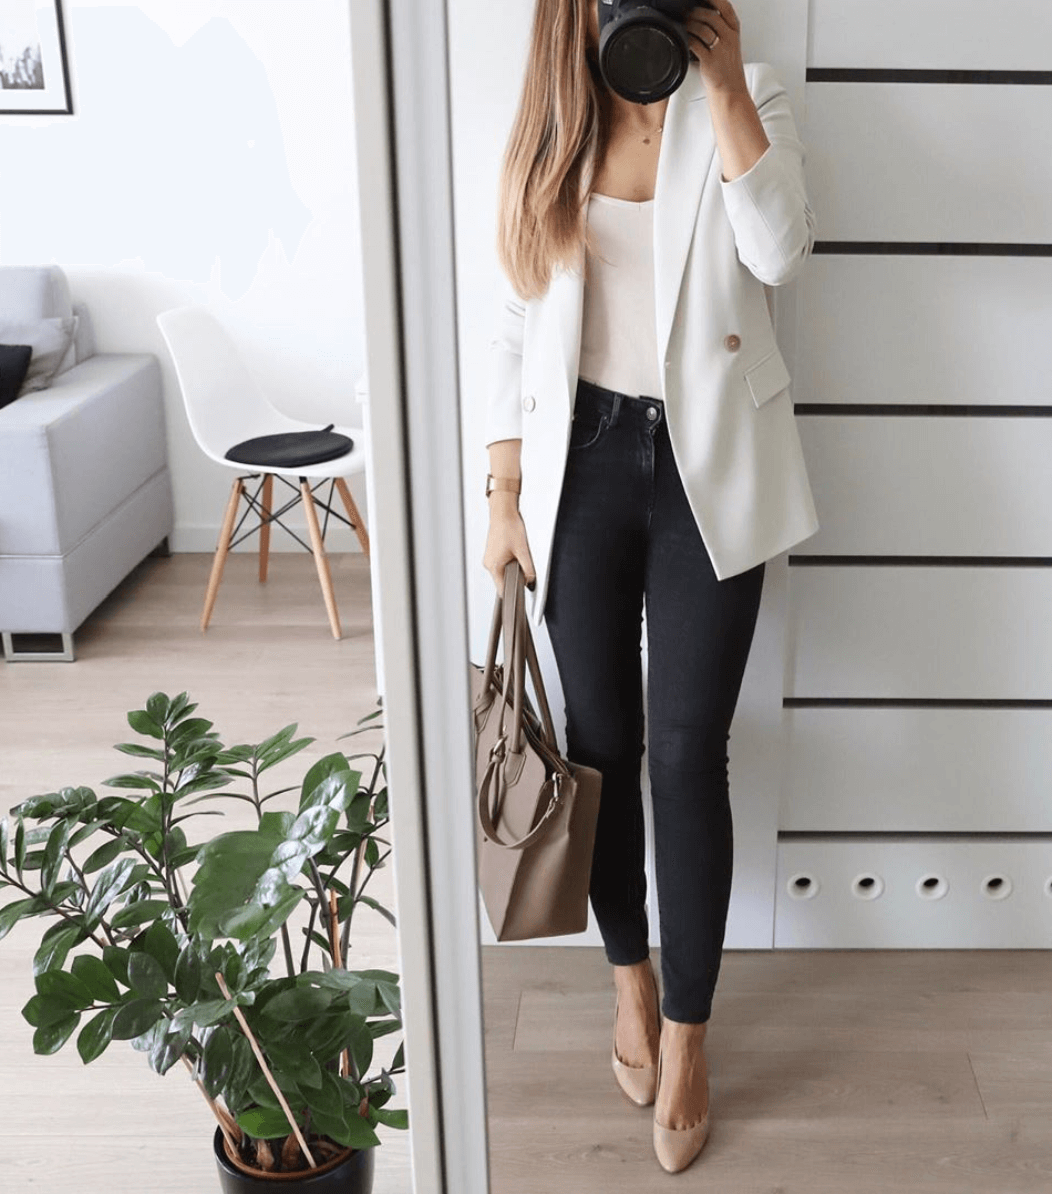 20 Trendy Fall Outfit Ideas For Work 16